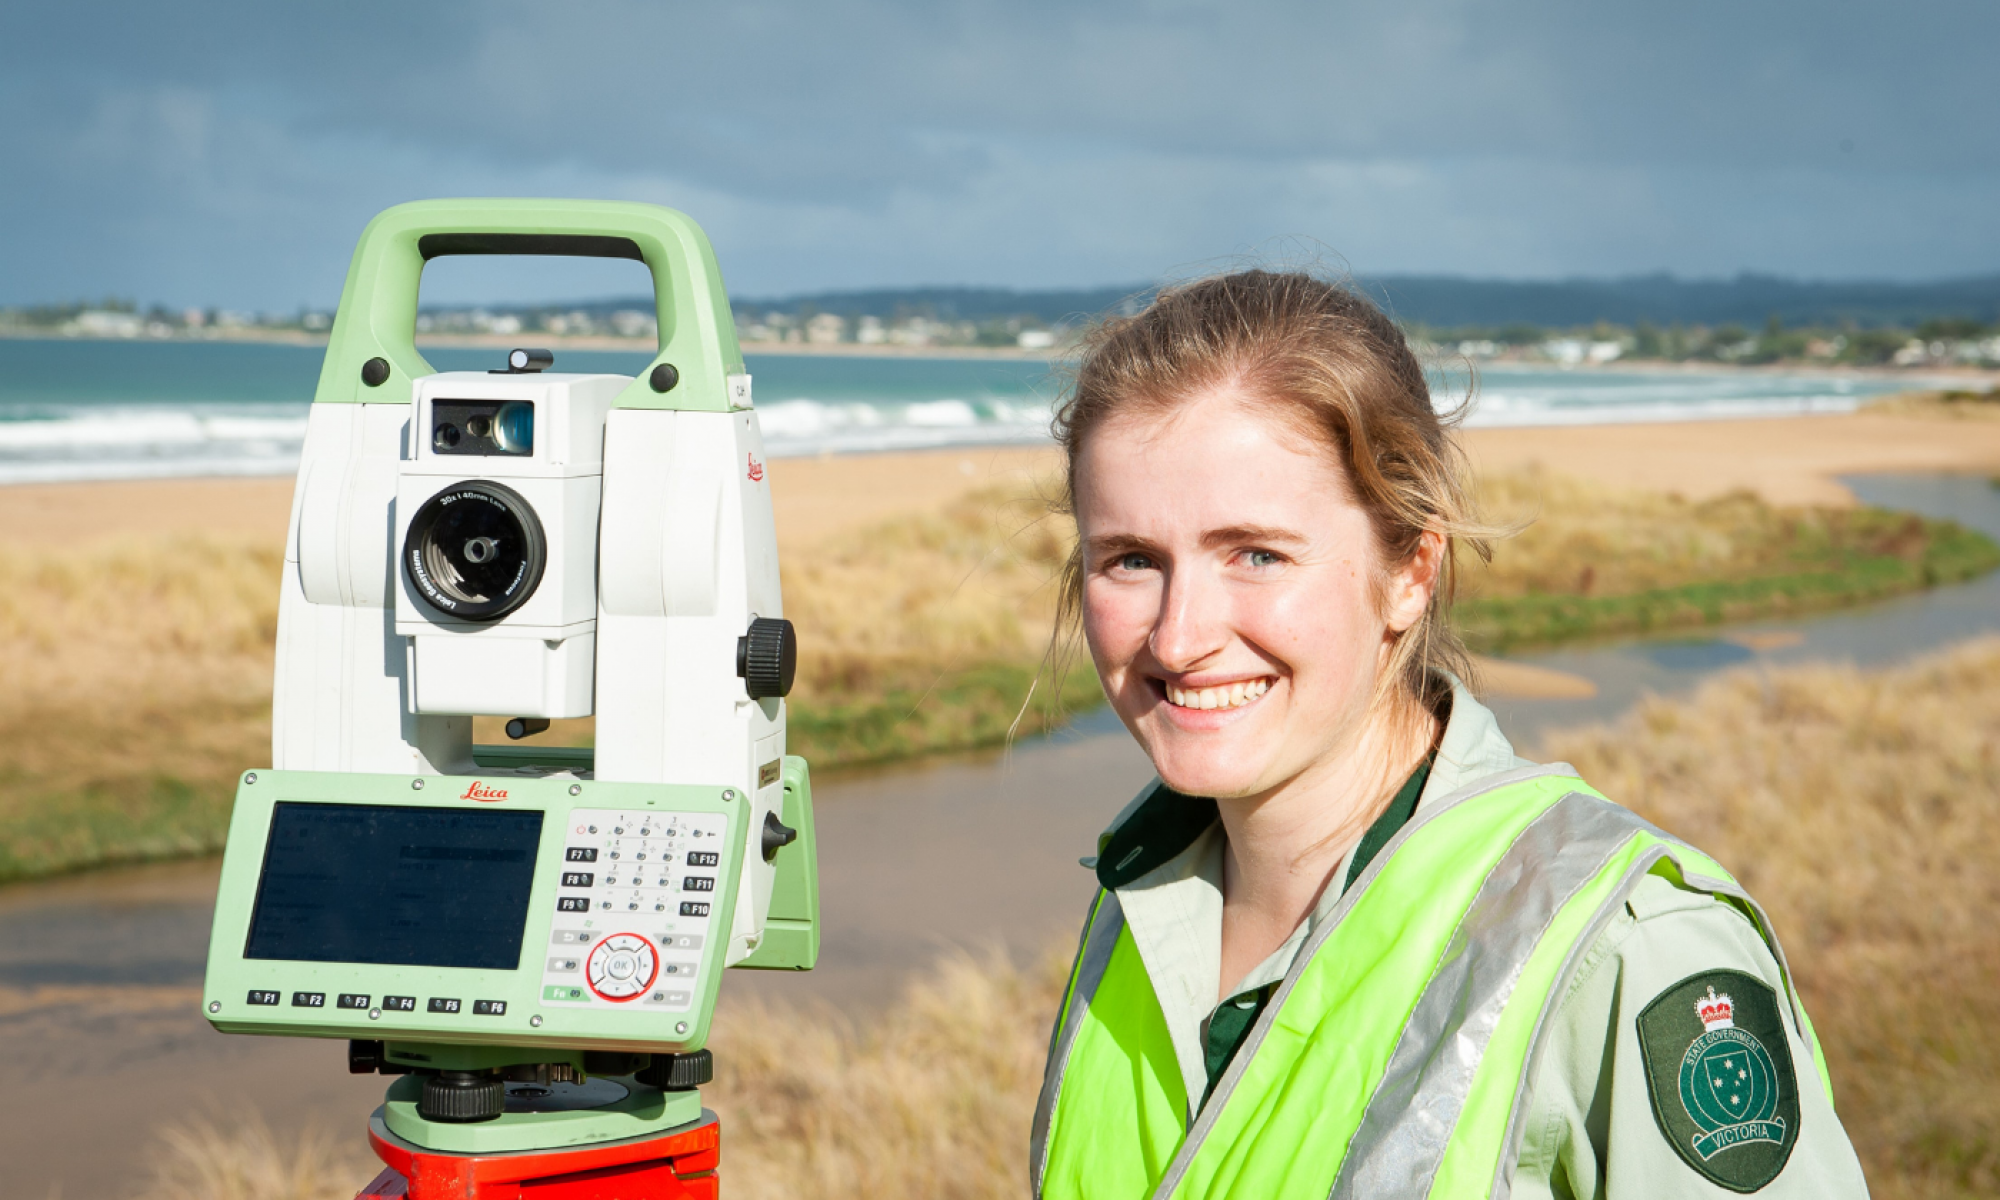 A woman wearing a yellow high-visibility vest stands next to surveying equipment in front of a footpath and breaking waves on a beach.